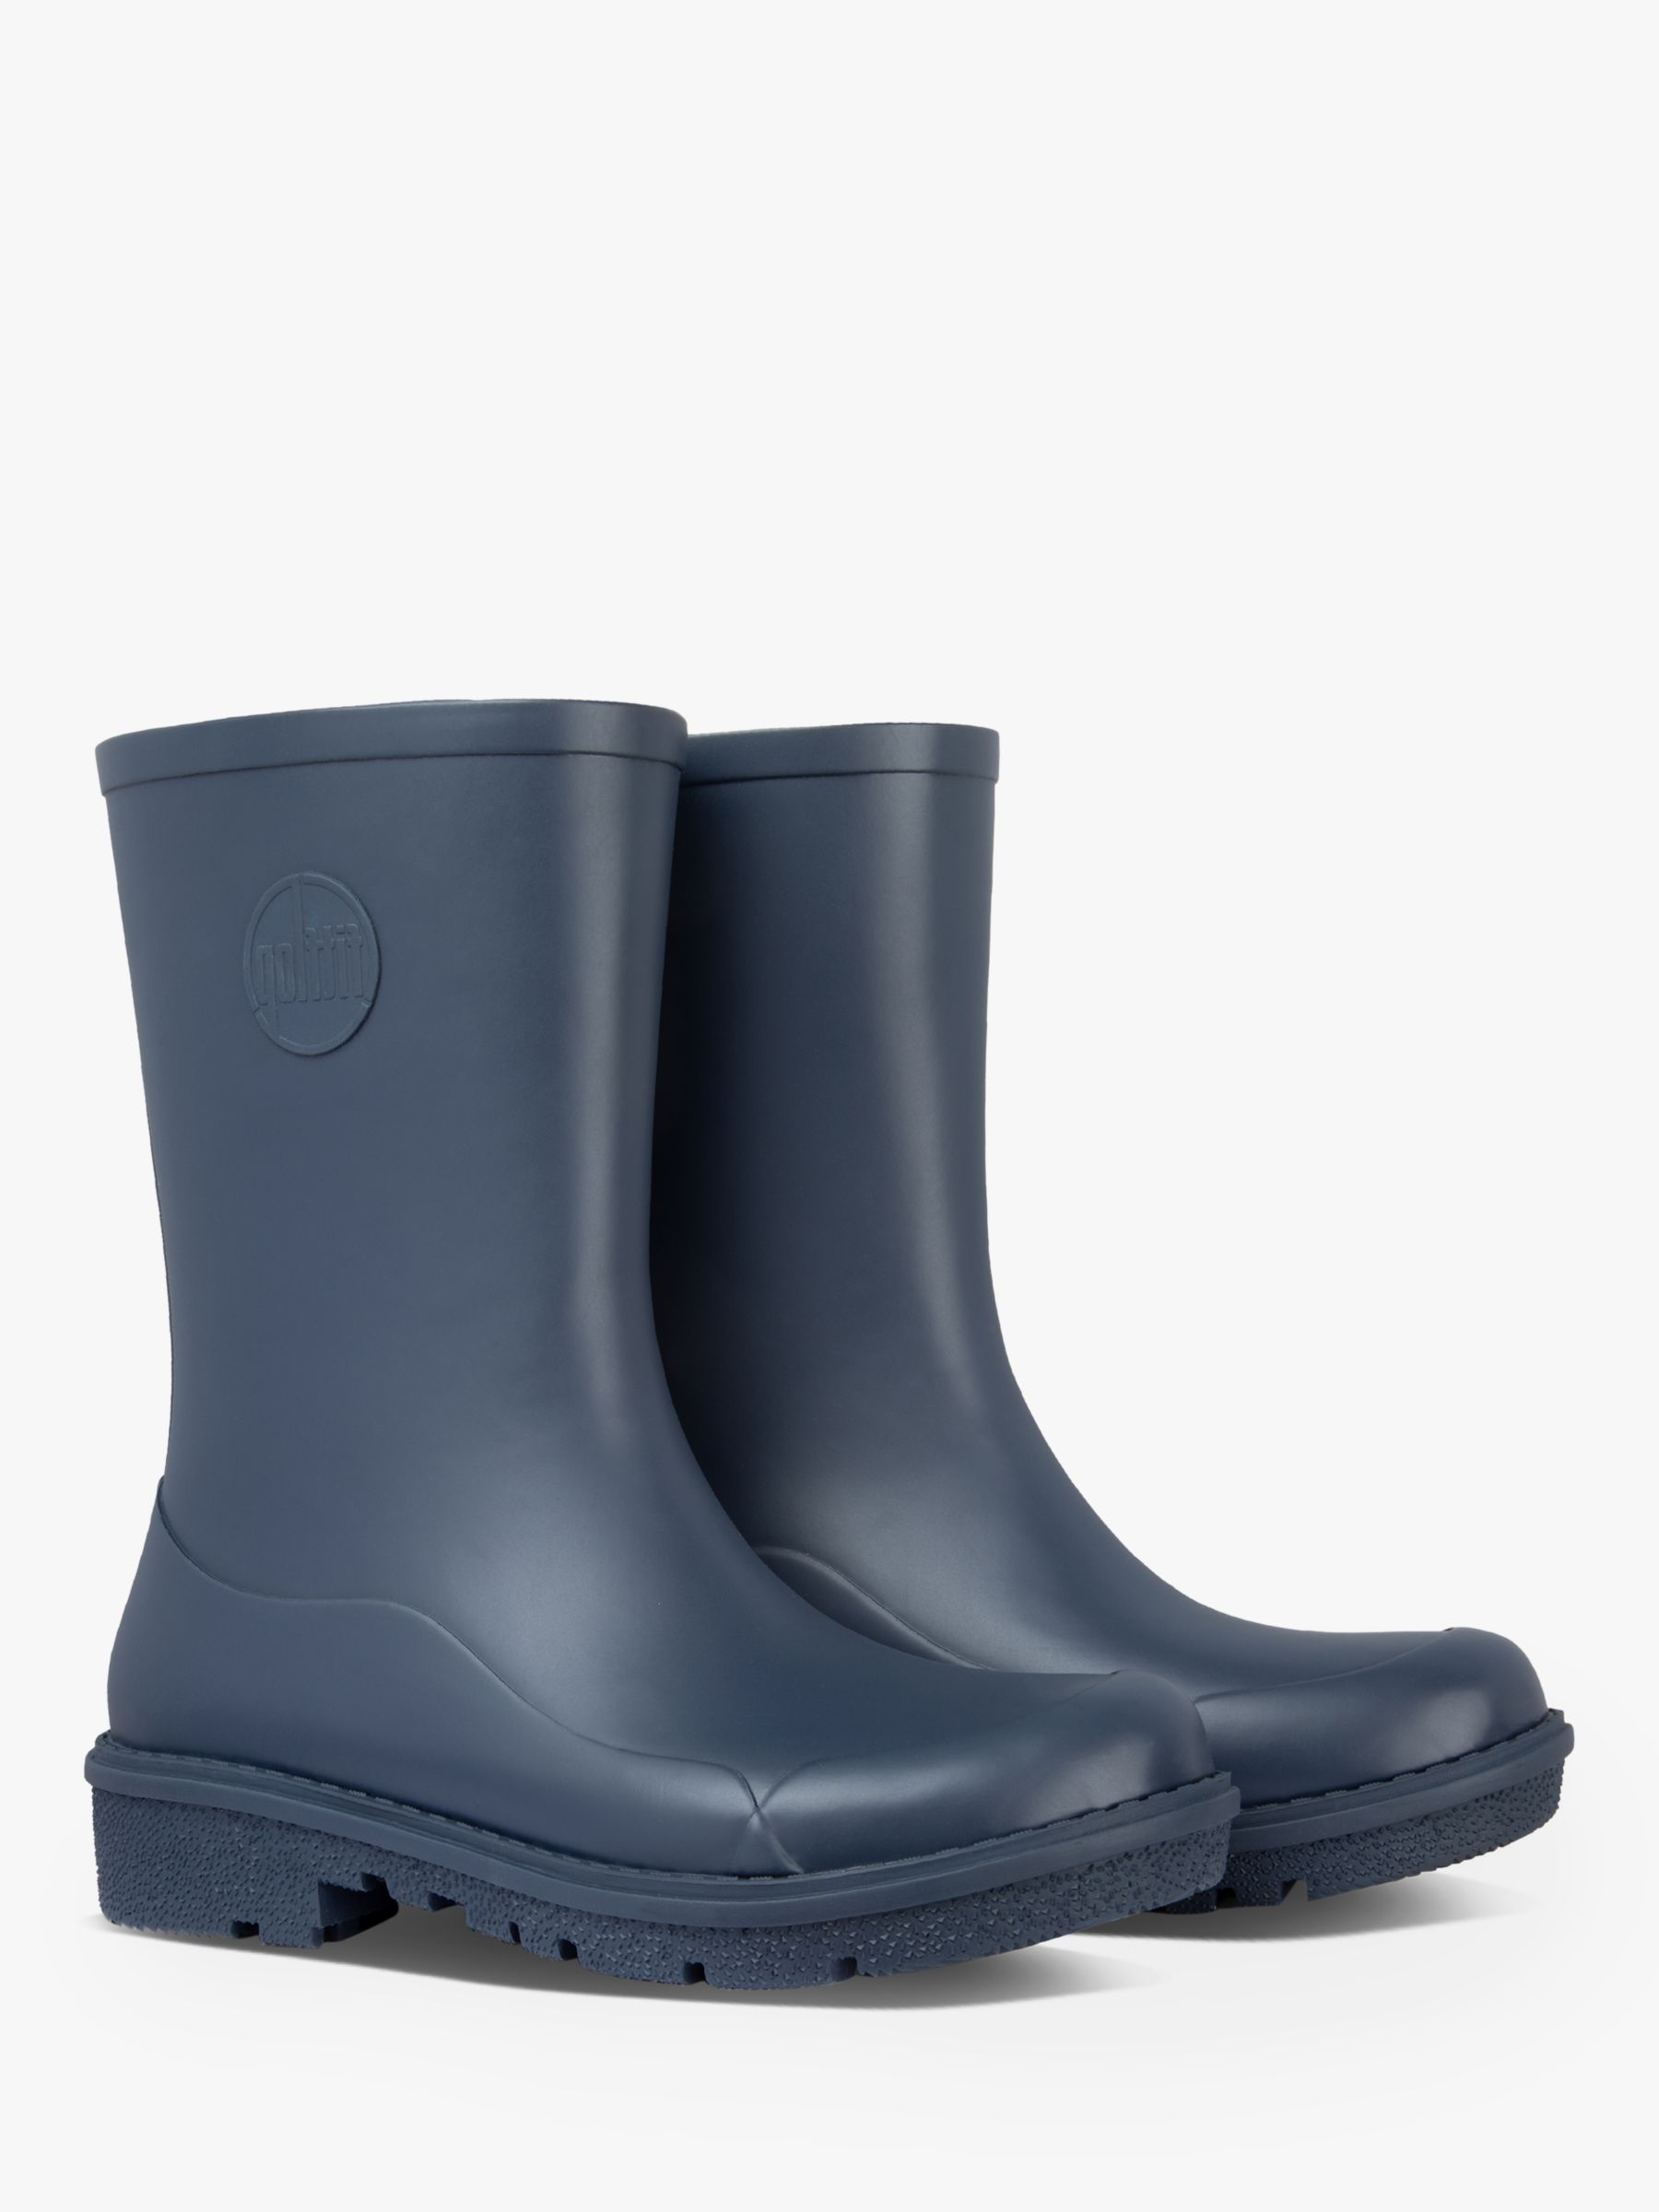 Buy FitFlop Wonderwelly Short Wellington Boots Online at johnlewis.com